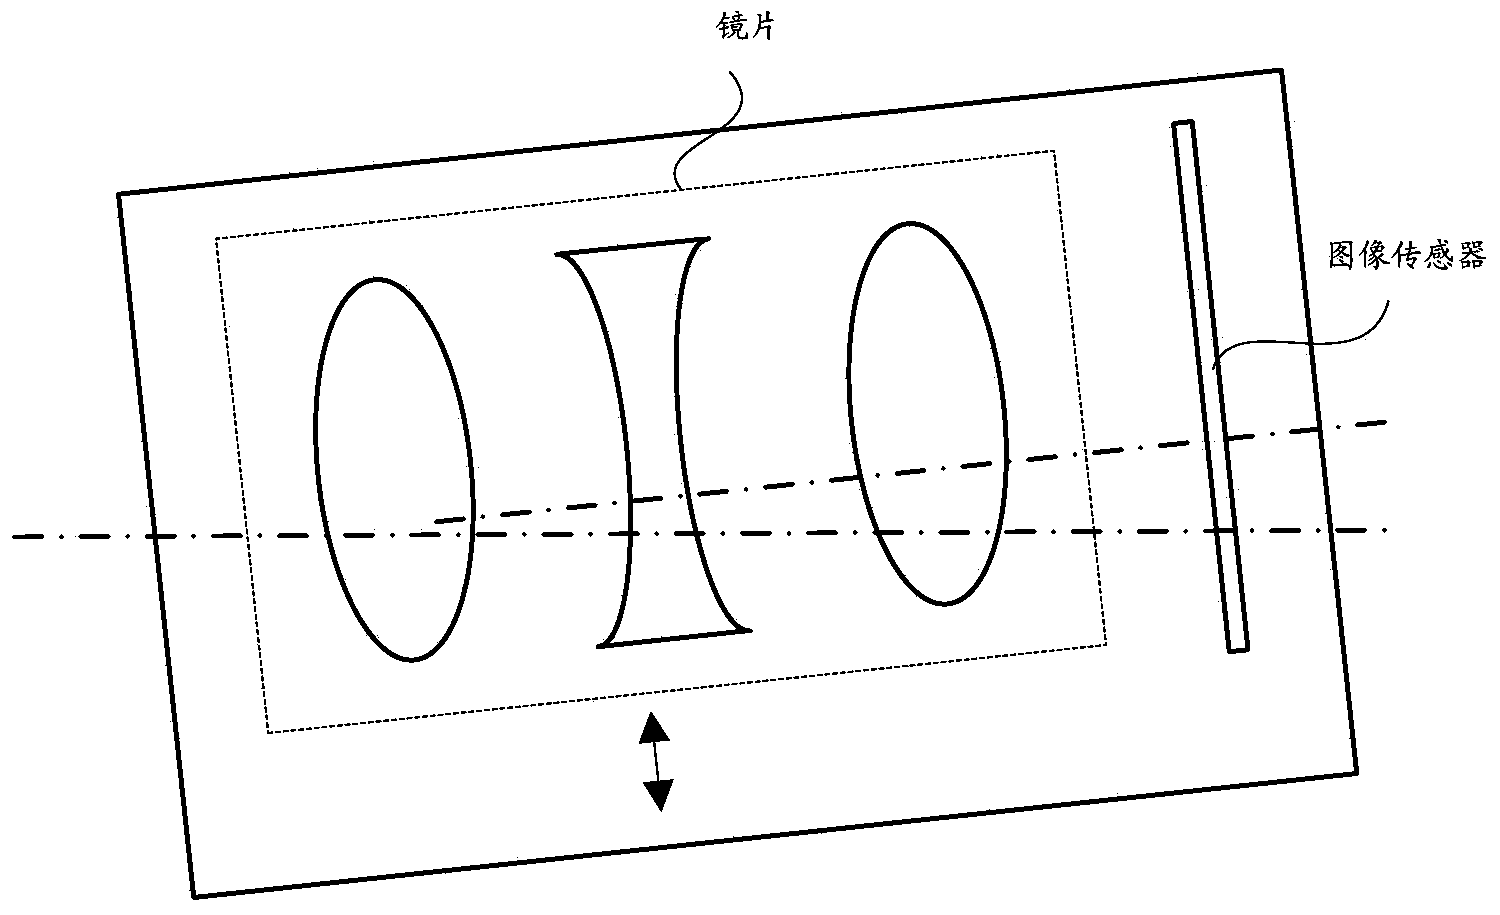 Optical imaging device, optical system and mobile terminal